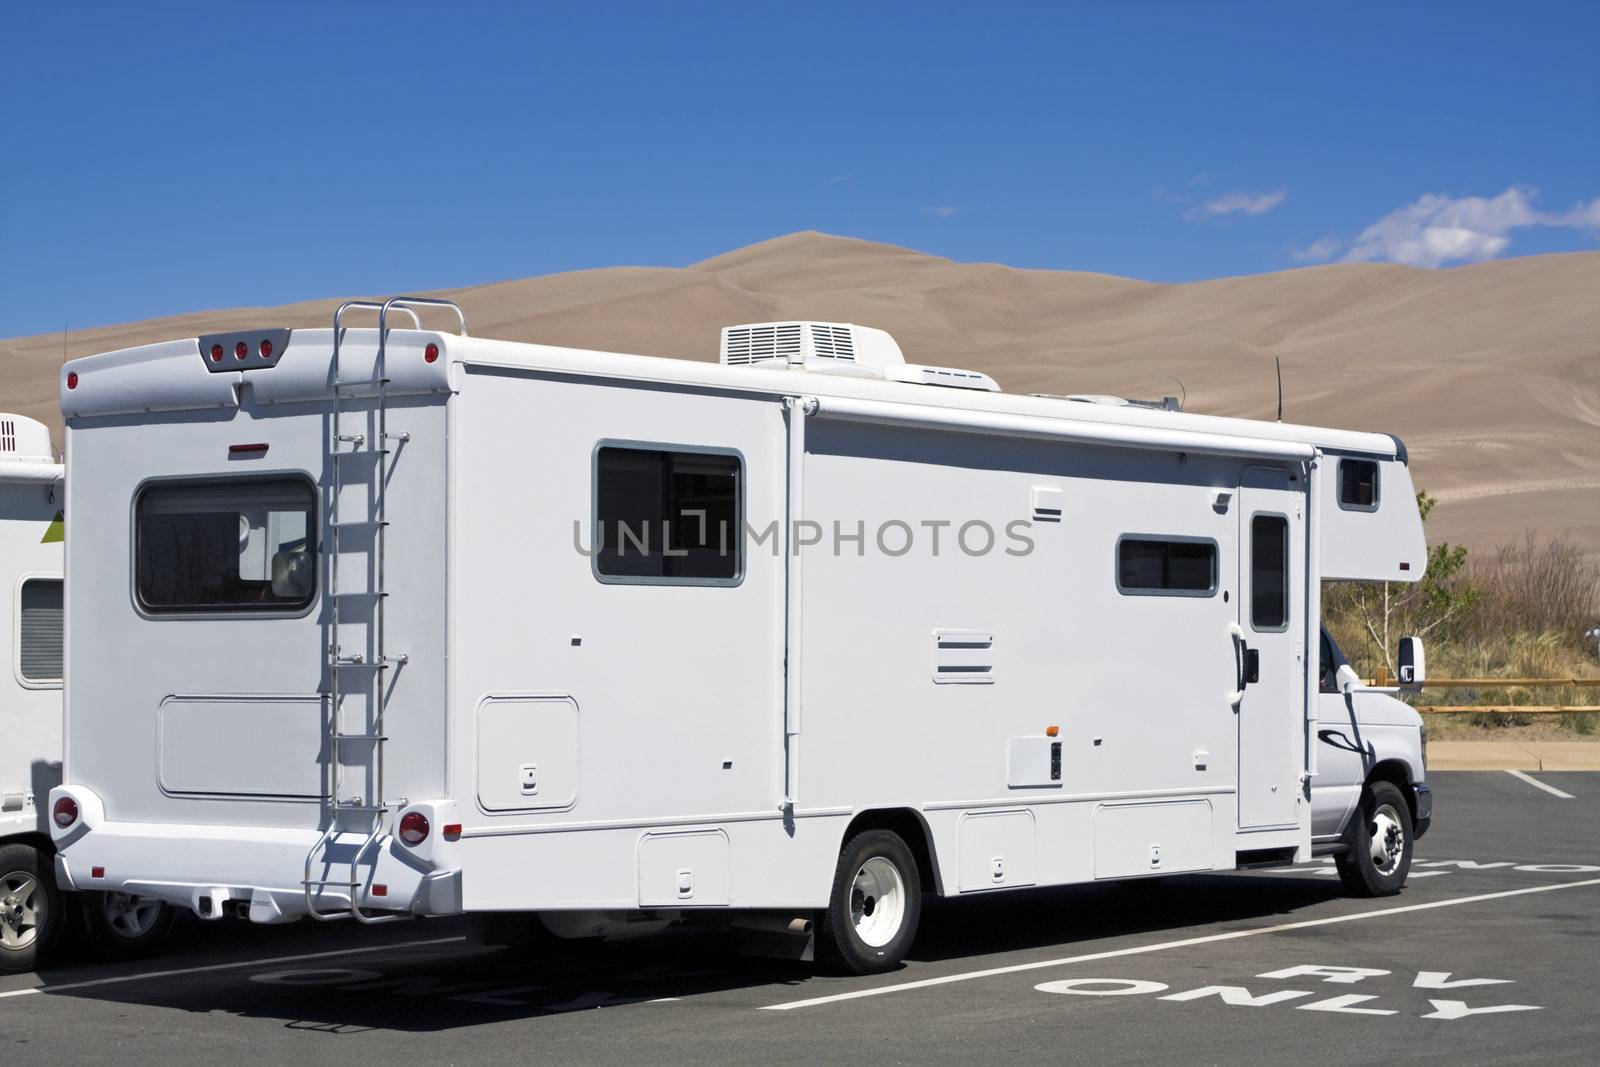 Luxury RV in Great Sand Dunes National Park in Colorado.